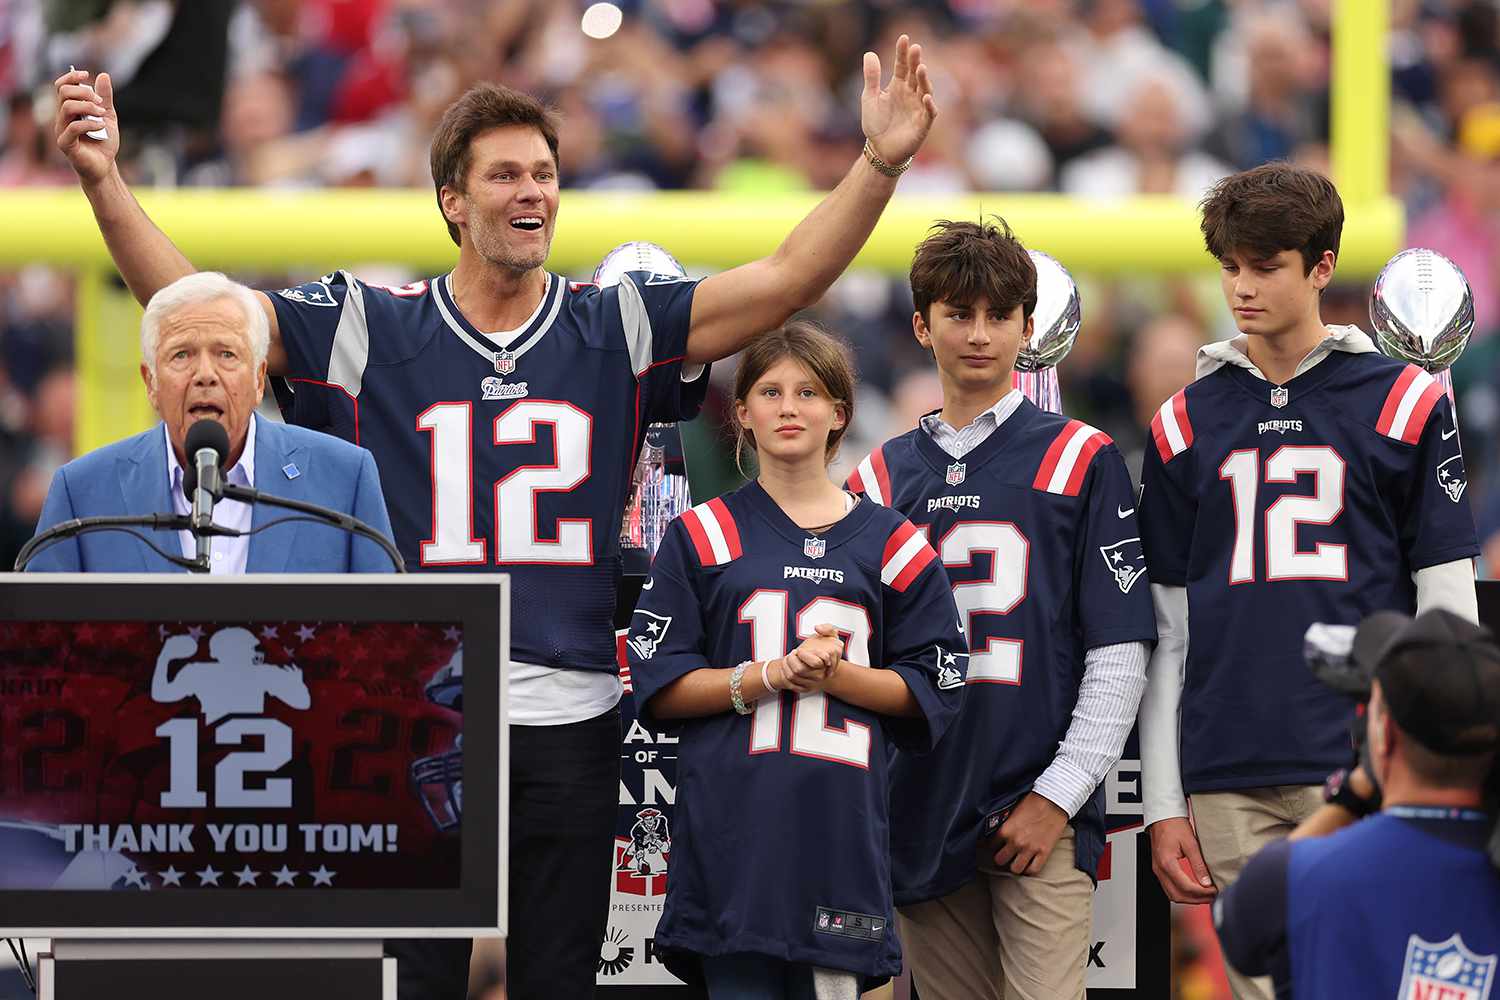 New England Patriots owner Robert Kraft speaks while former New England Patriots quarterback Tom Brady reacts while Brady's children, Vivian, Benjamin, and Jack, look on during a ceremony honoring Brady at halftime of New England's game against the Philadelphia Eagles